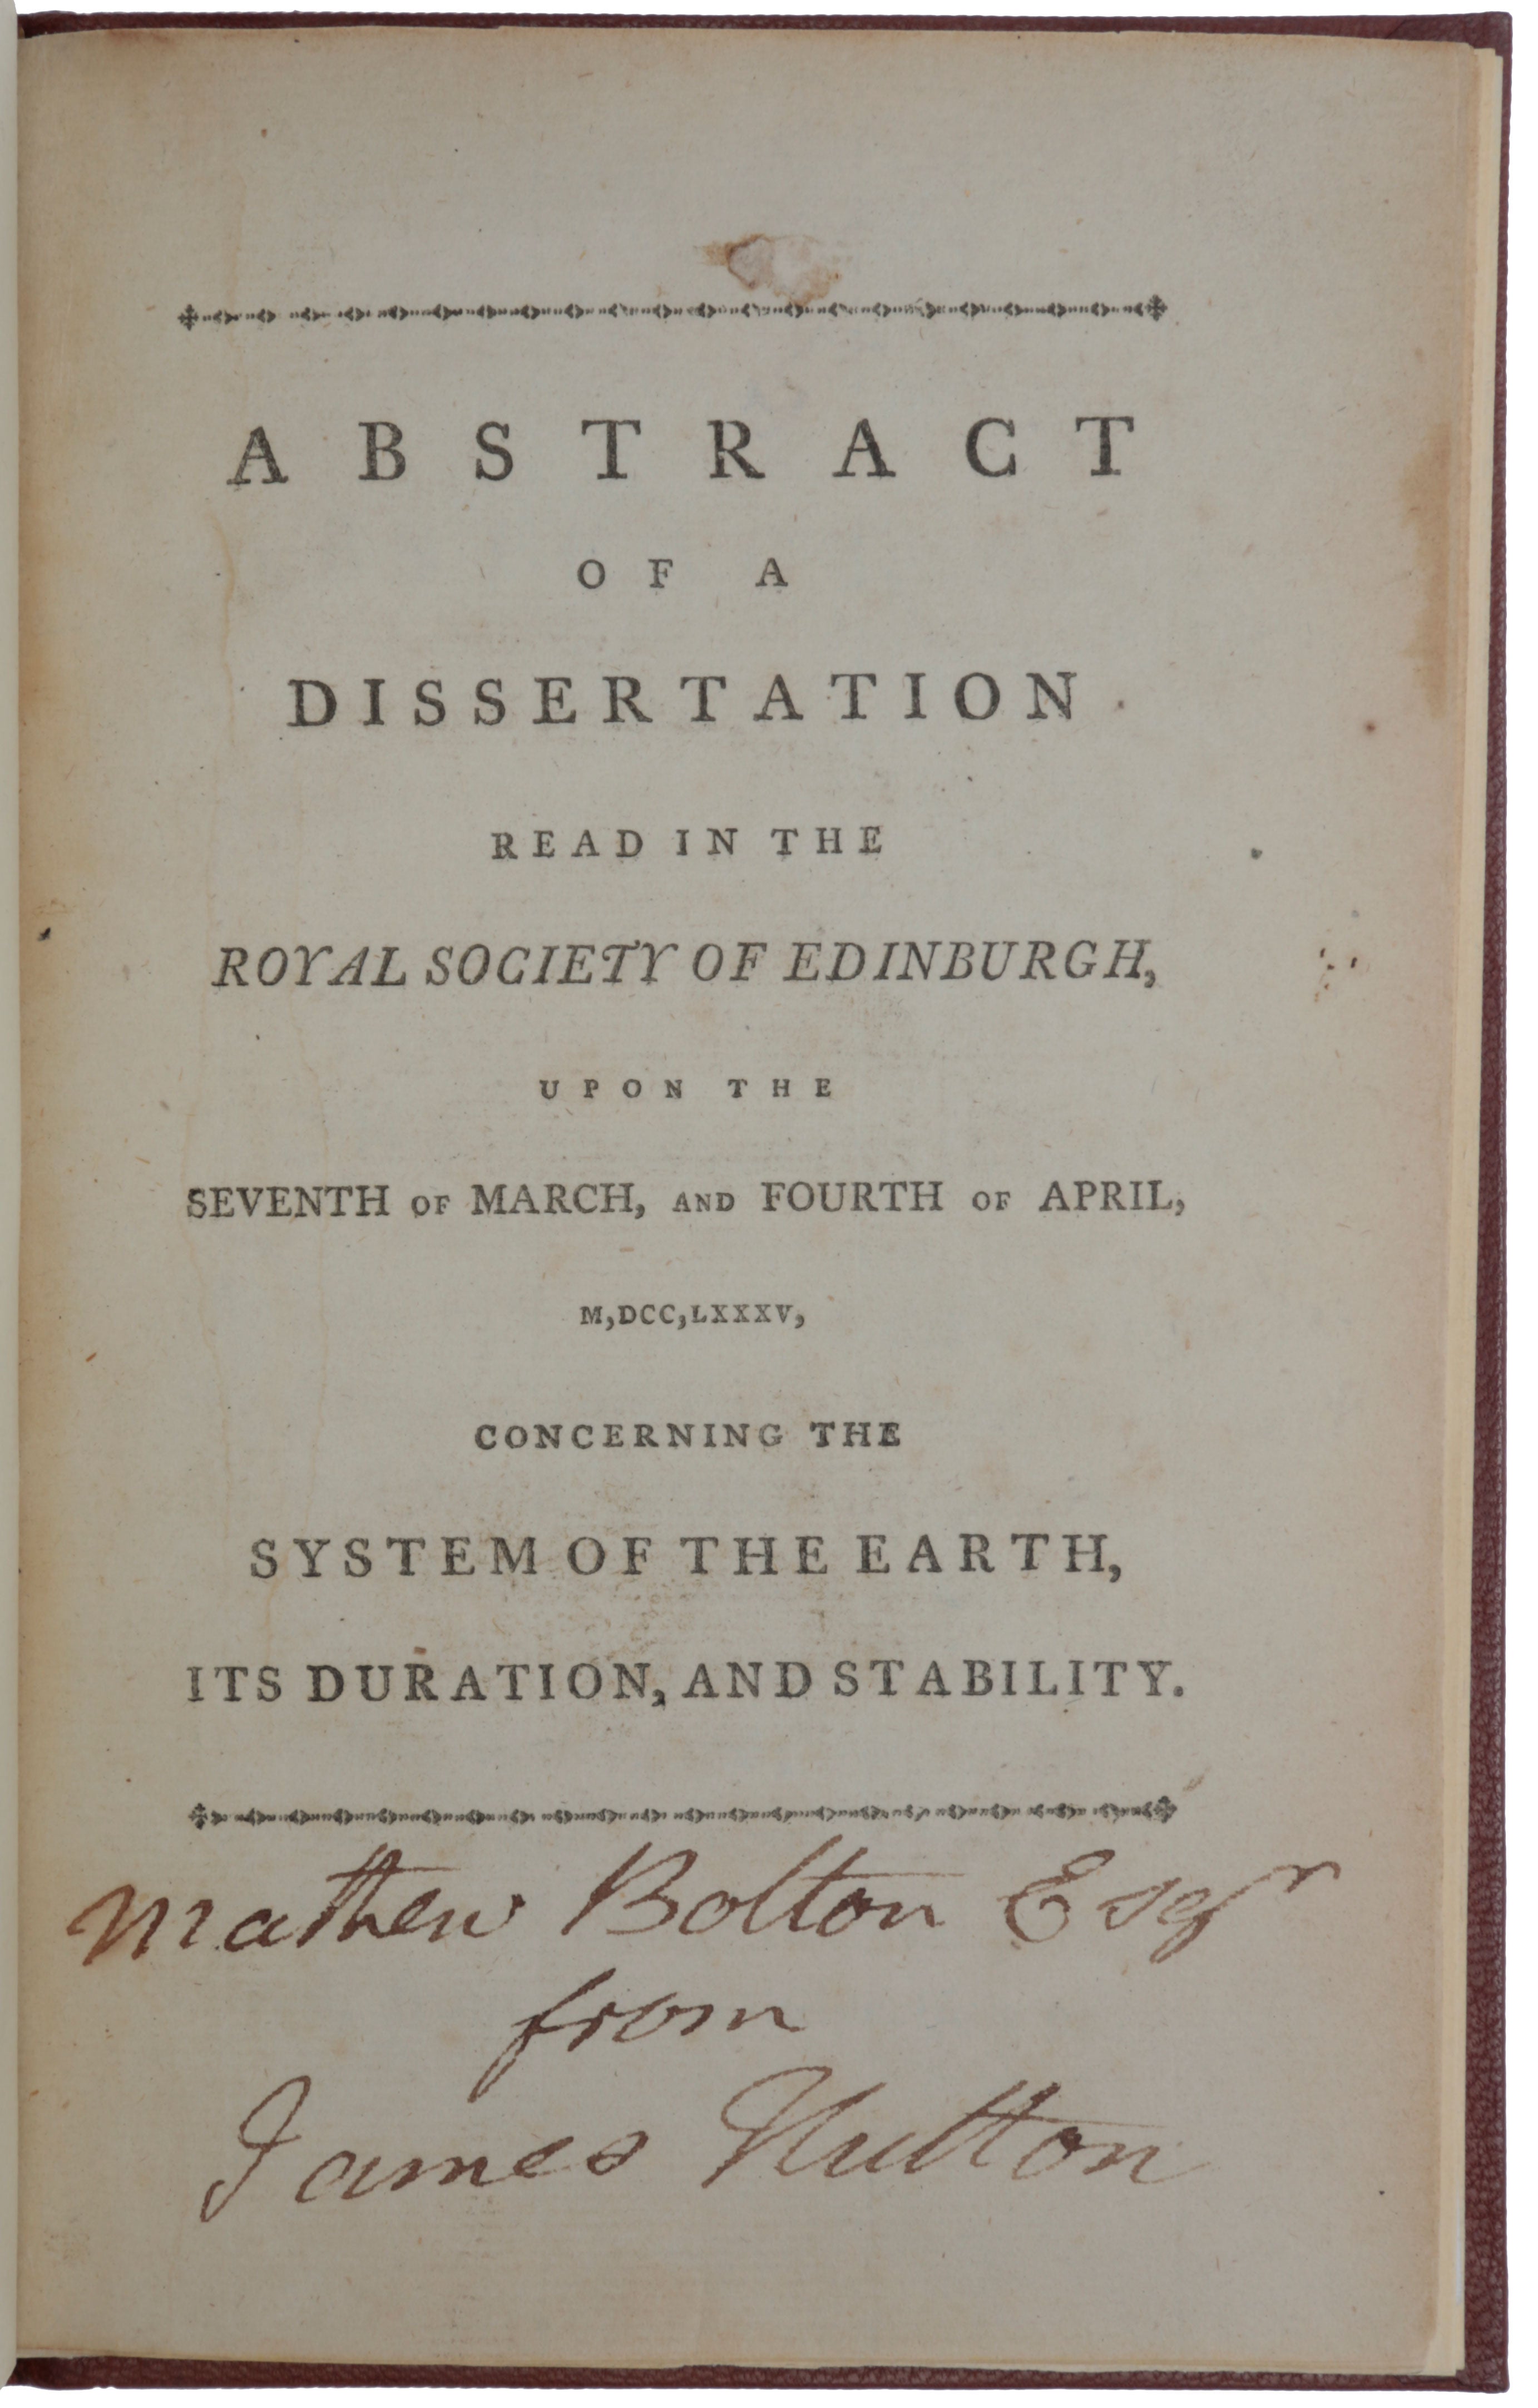 Item #5349 Abstract of a Dissertation Read in the Royal Society of Edinburgh, upon the Seventh of March, and Fourth of April, M,DCC,LXXXV, concerning the System of the Earth, its Duration, and Stability. James HUTTON.